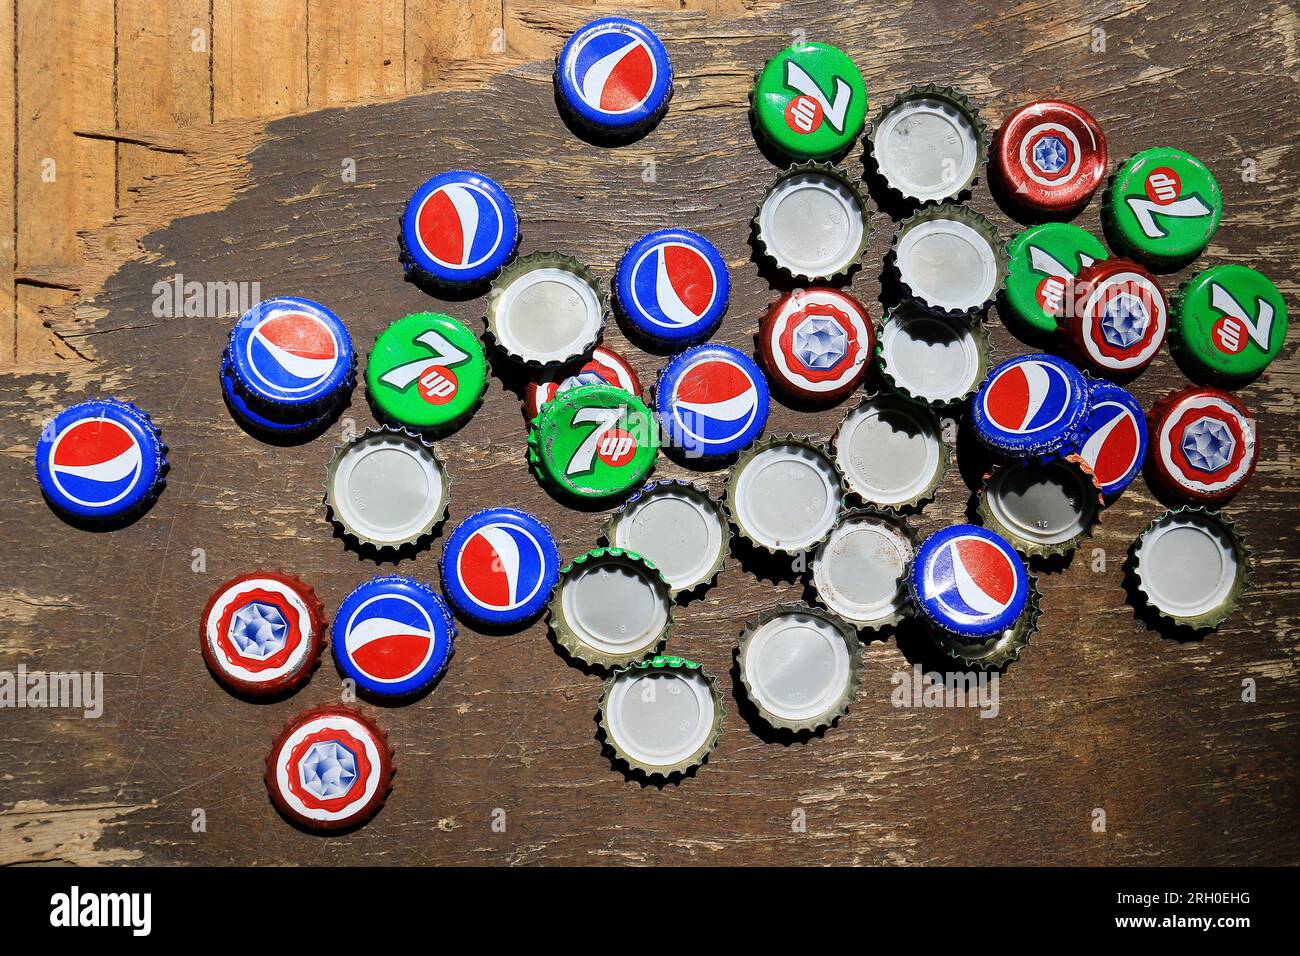 Caps of pepsi cola, 7Up, and Almaza beer on a table. Stock Photo